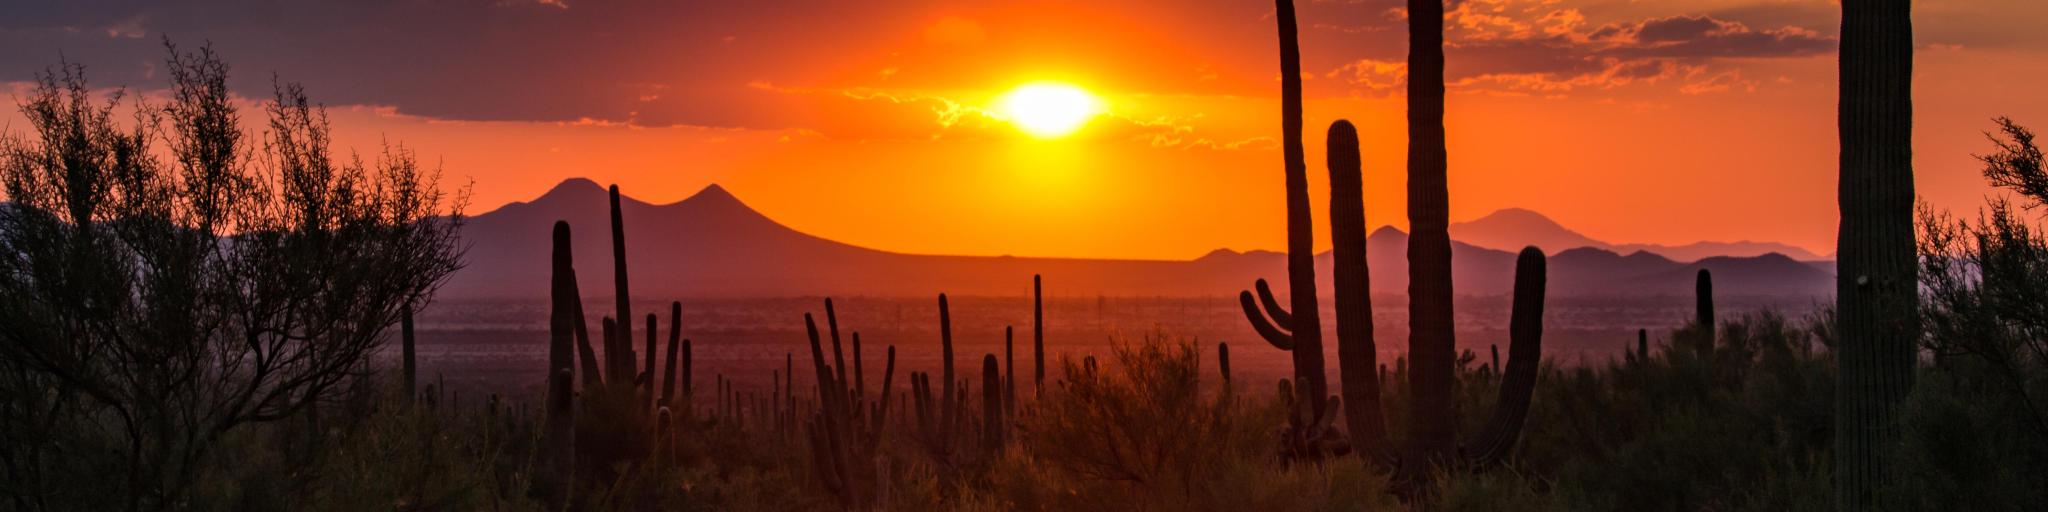 Sunset outside Tucson, Arizona, with mountains and tall cactus silhouetted by bright sun in orange sky